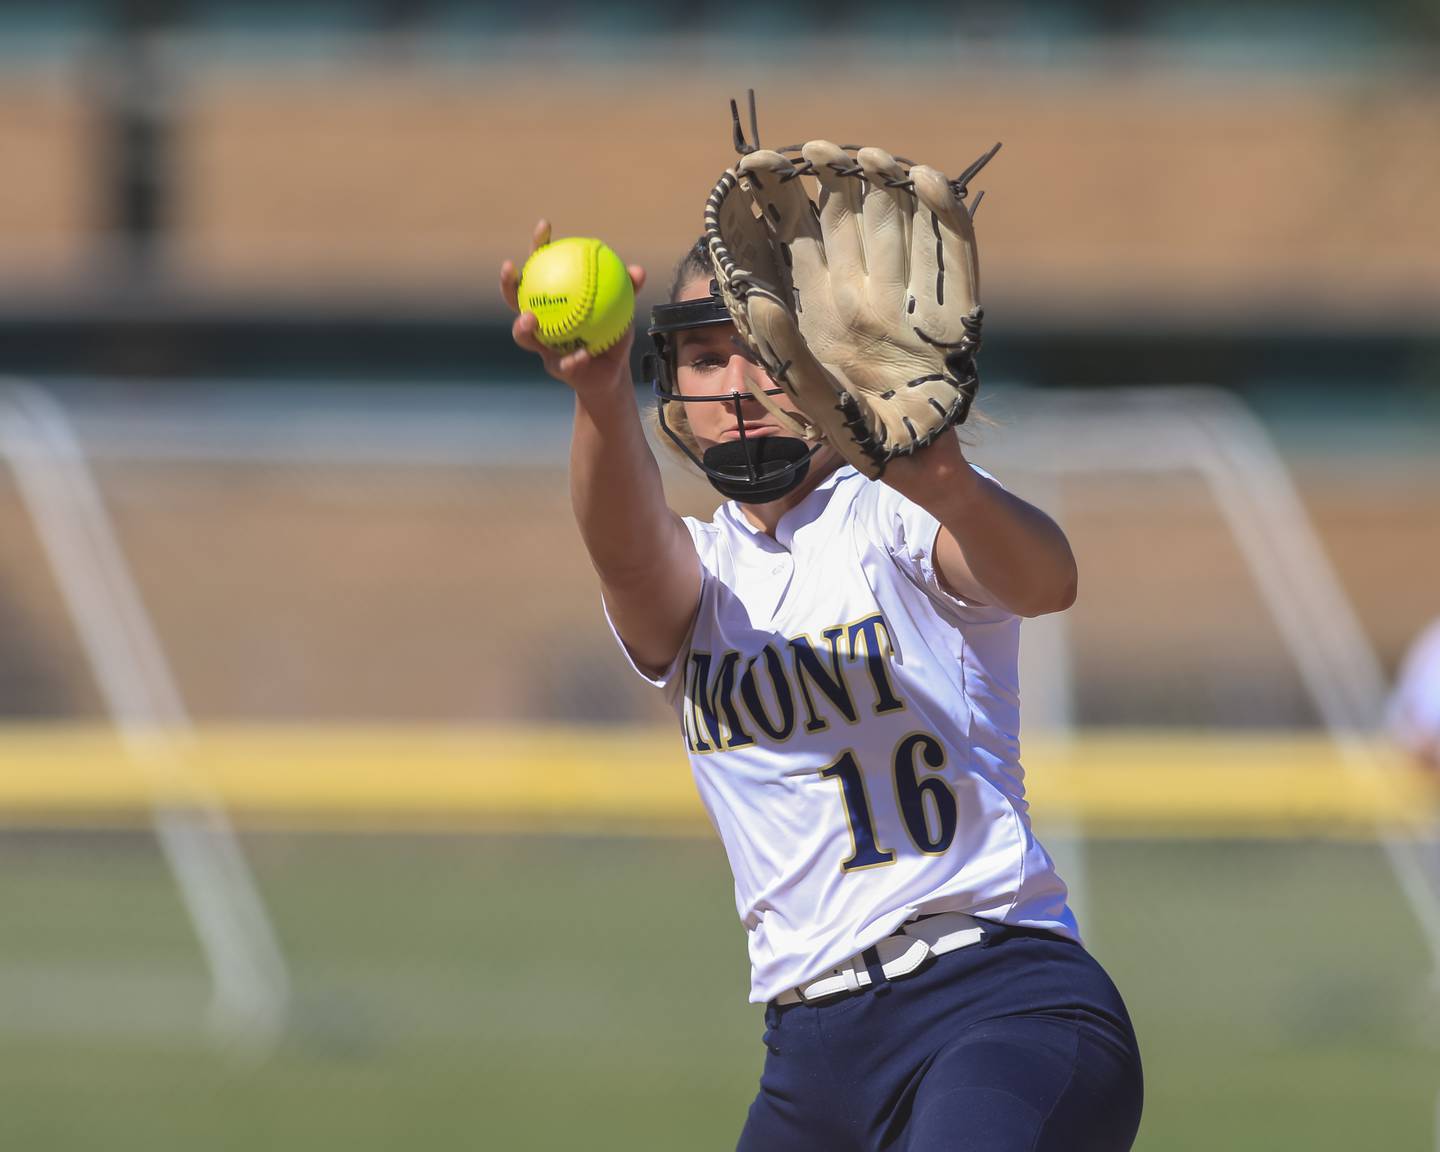 Lemont's Sage Mardjetko (16) winds up to deliver to the plate during Class 3A Joliet Catholic Sectional final game between Marian Catholic at Lemont.  June 3, 2022.